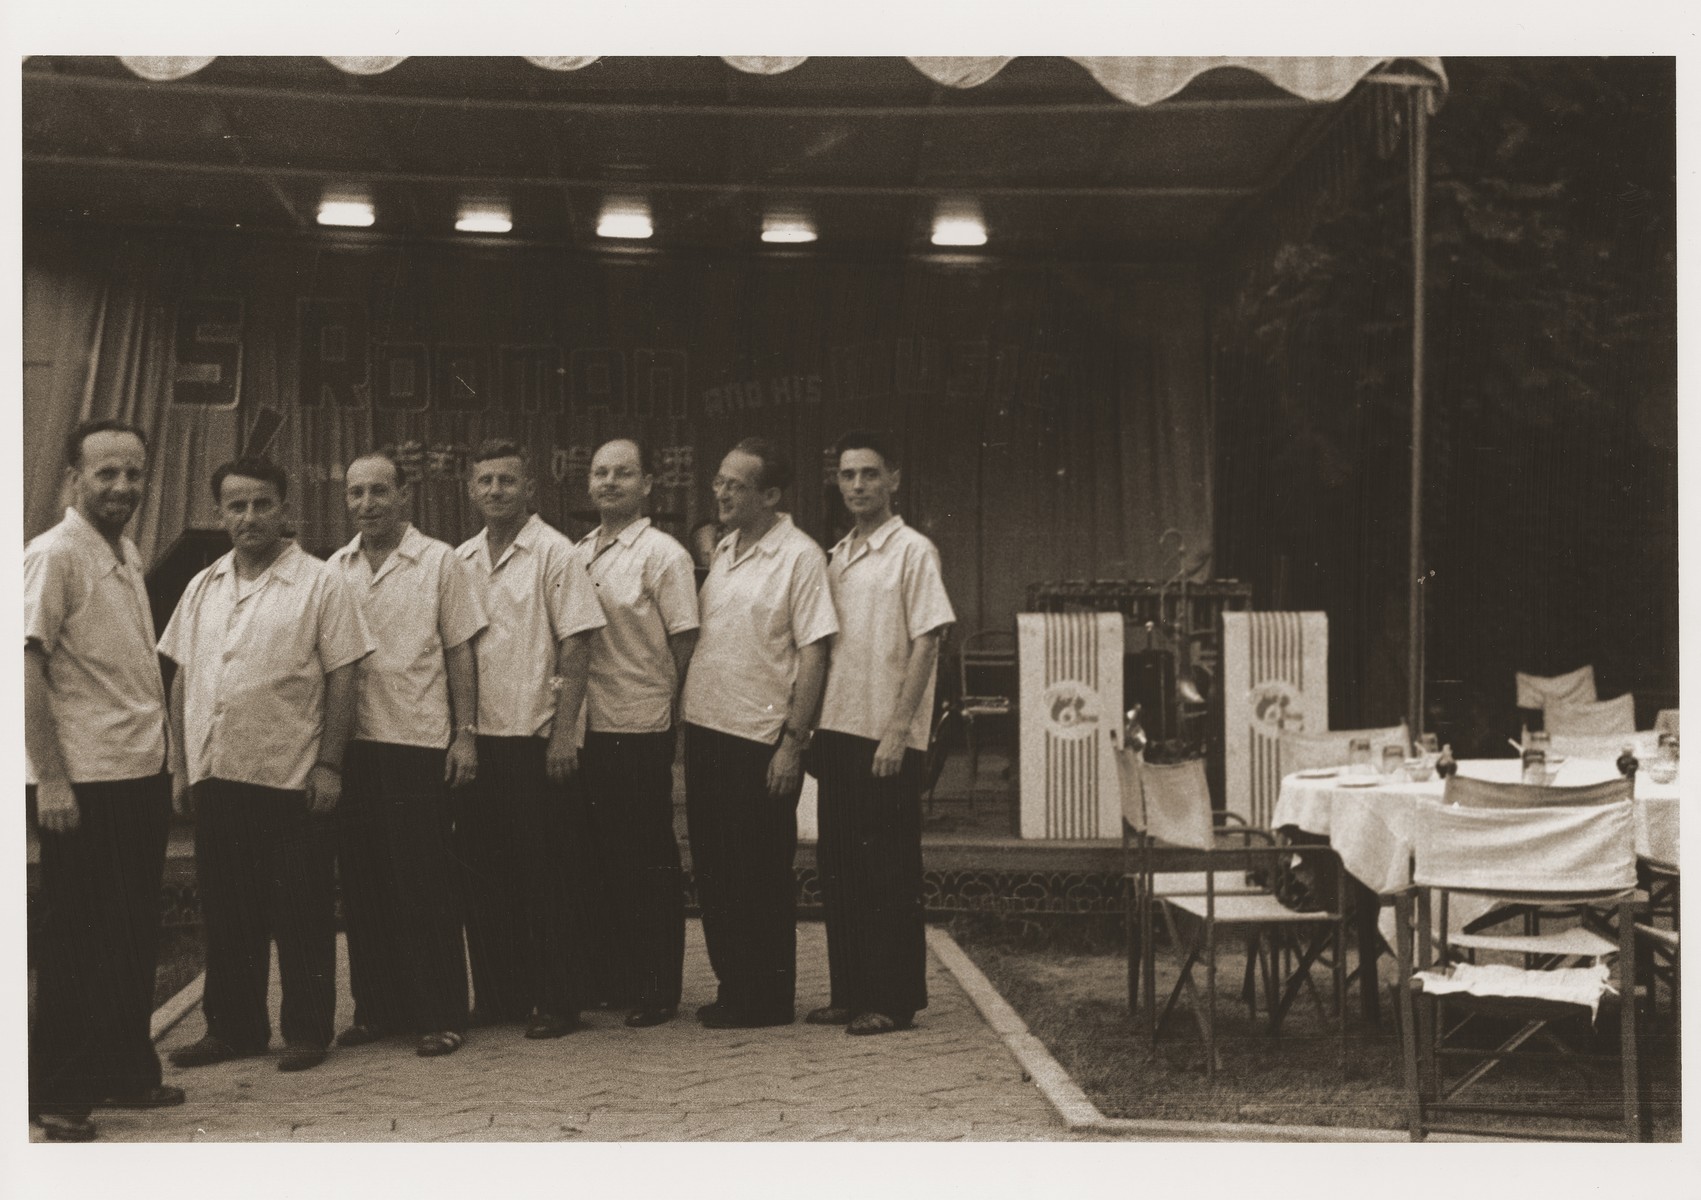 Members of the Siegmund Rodman band at the Roof Garden restaurant on Ward Road in Shanghai.

The Roof Garden was a favorite cafe for Jewish refugees in Shanghai.